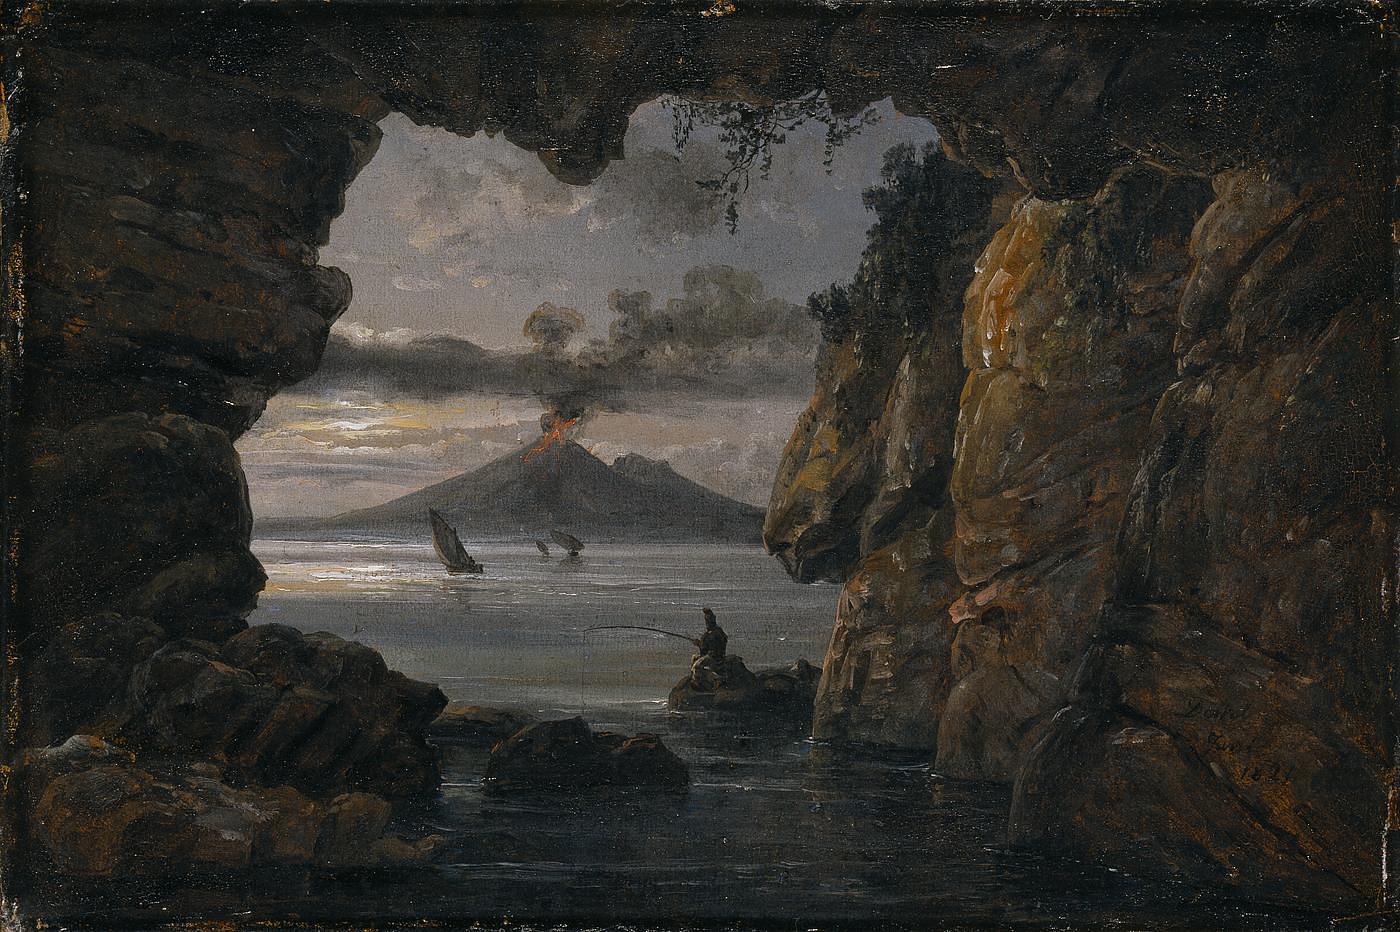 View from a Grotto of the Bay of Naples with Vesuvius in Eruption, B180